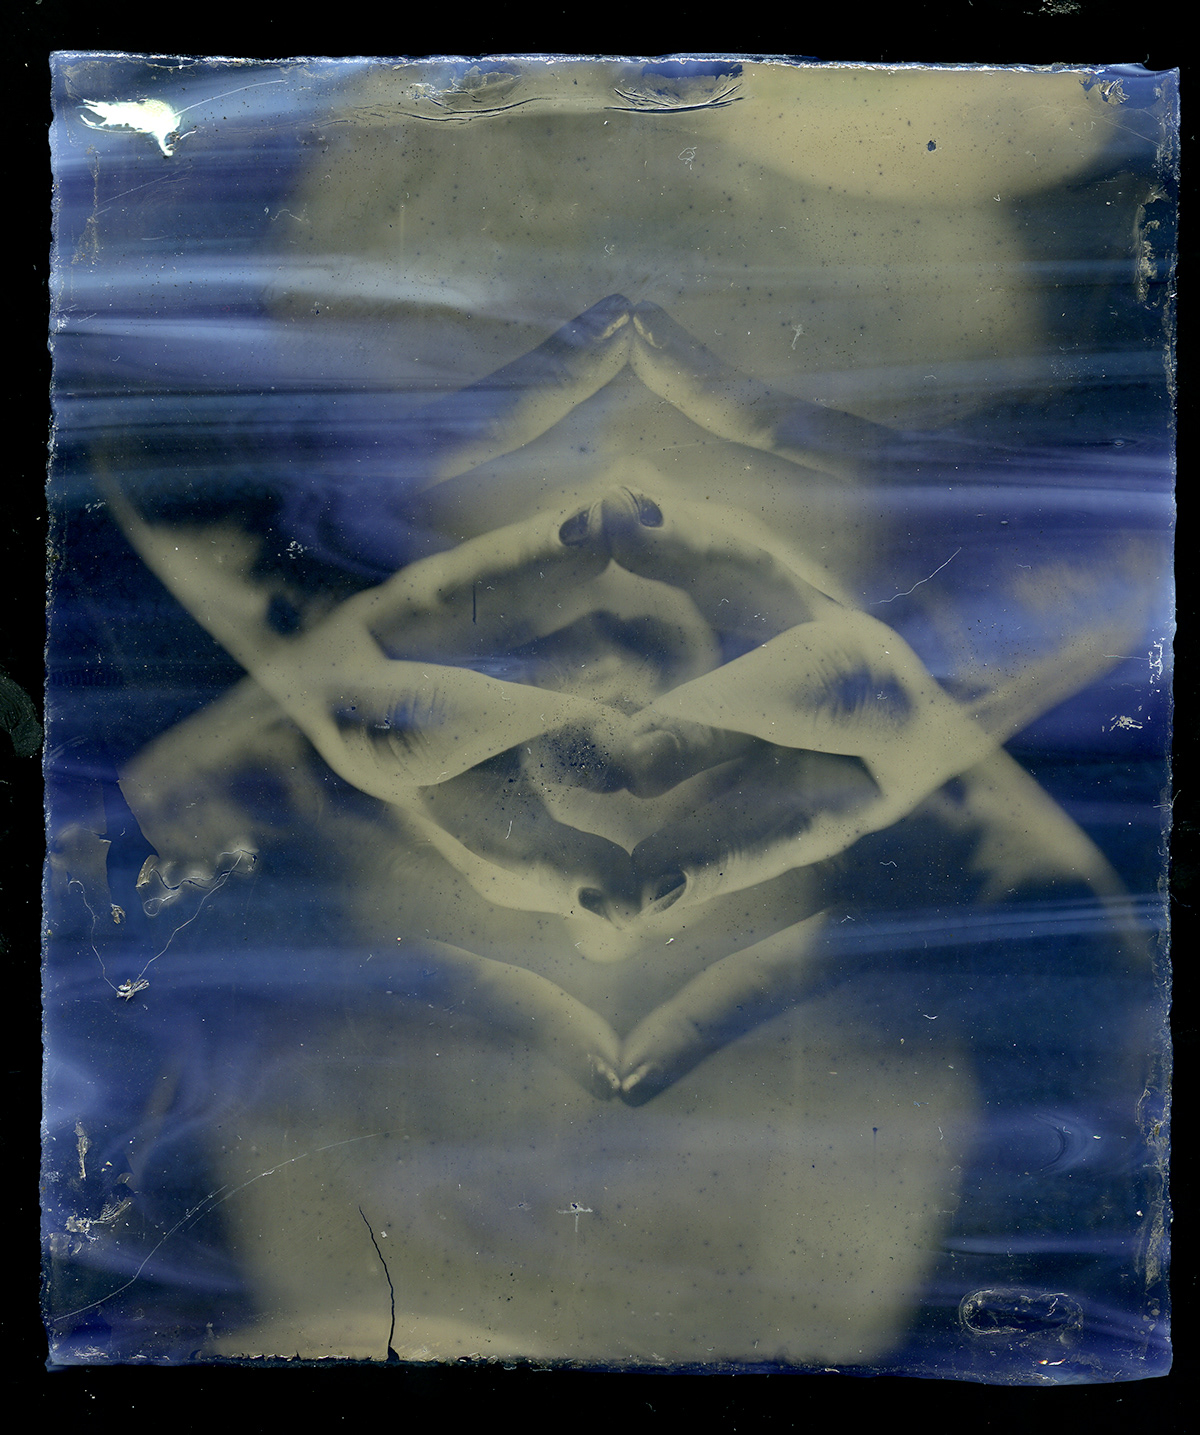 collodion wetplate darkroom mystical Magical analog experimental surreal surrealism hands fingers illusion perception stained glass glass